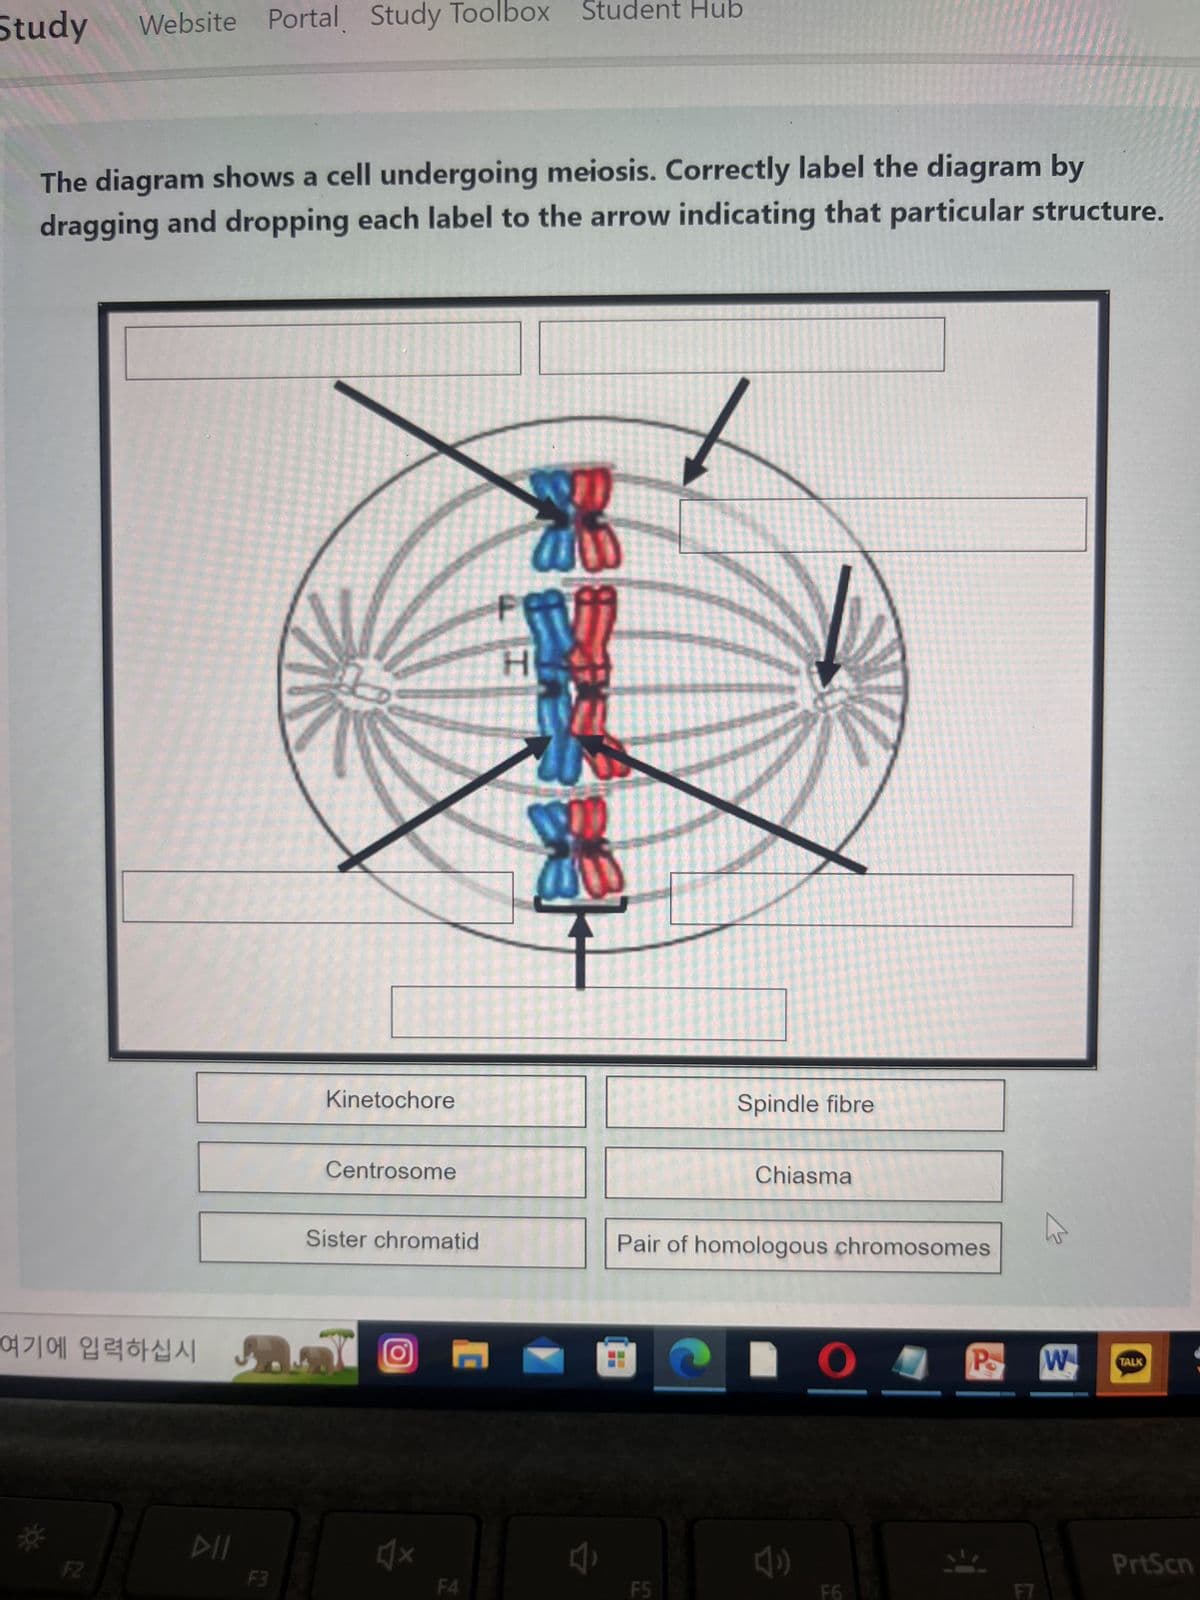 Study
The diagram shows a cell undergoing meiosis. Correctly label the diagram by
dragging and dropping each label to the arrow indicating that particular structure.
Website Portal Study Toolbox Student Hub
여기에 입력하십시
*
F2
DII
F3
Kinetochore
Centrosome
Sister chromatid
4x
C
F4
H
M
Spindle fibre
F5
Chiasma
Pair of homologous chromosomes
C O
F6
K
P W TALK
PrtScn